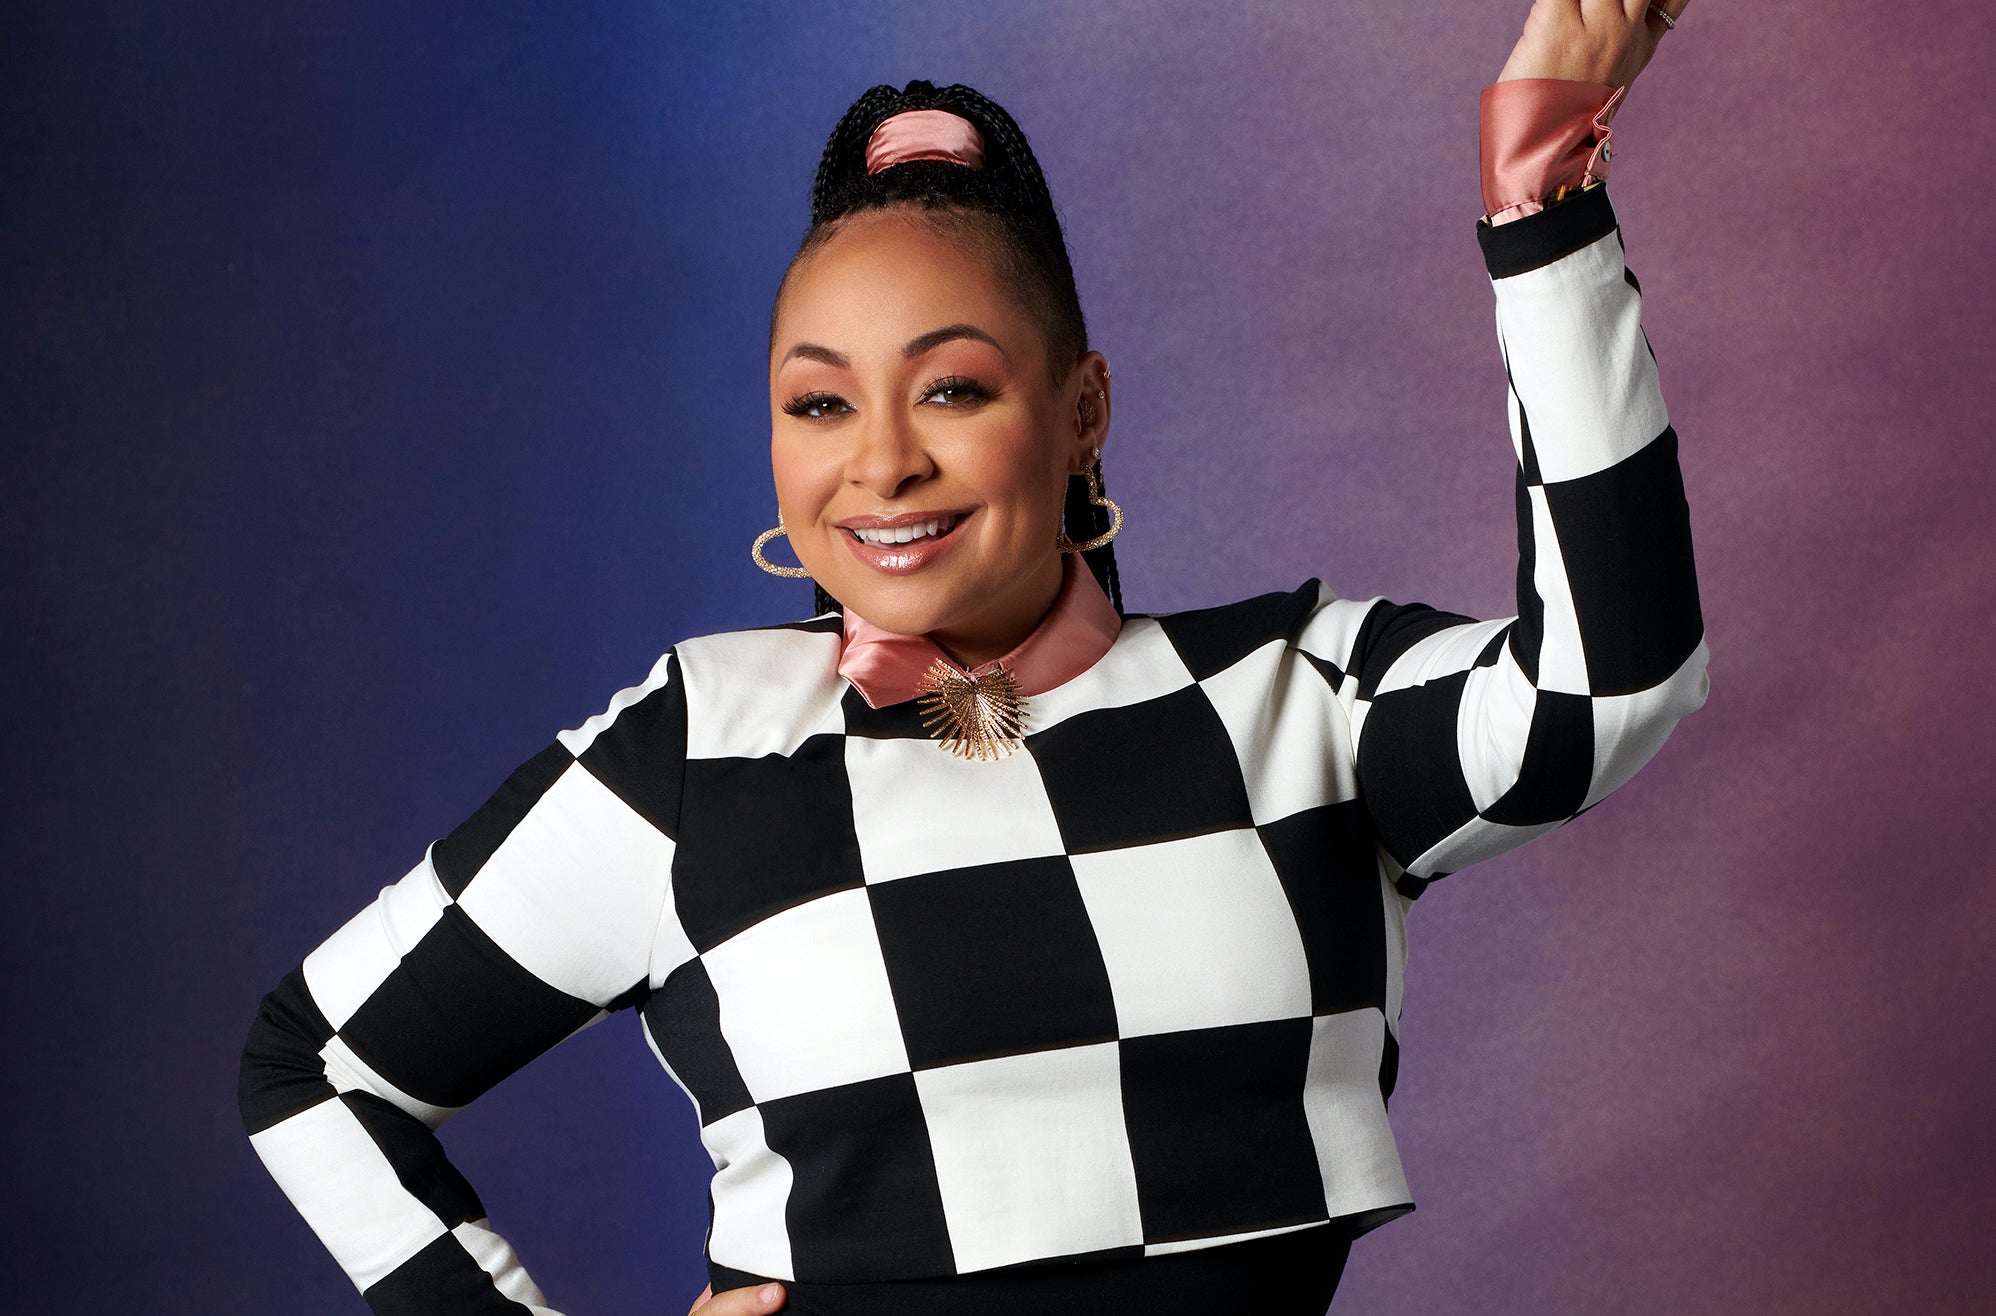 Raven-Symoné And The ‘Raven’s Home’ Cast Walk Off Set In Protest of Florida’s “Don’t Say Gay” Bill